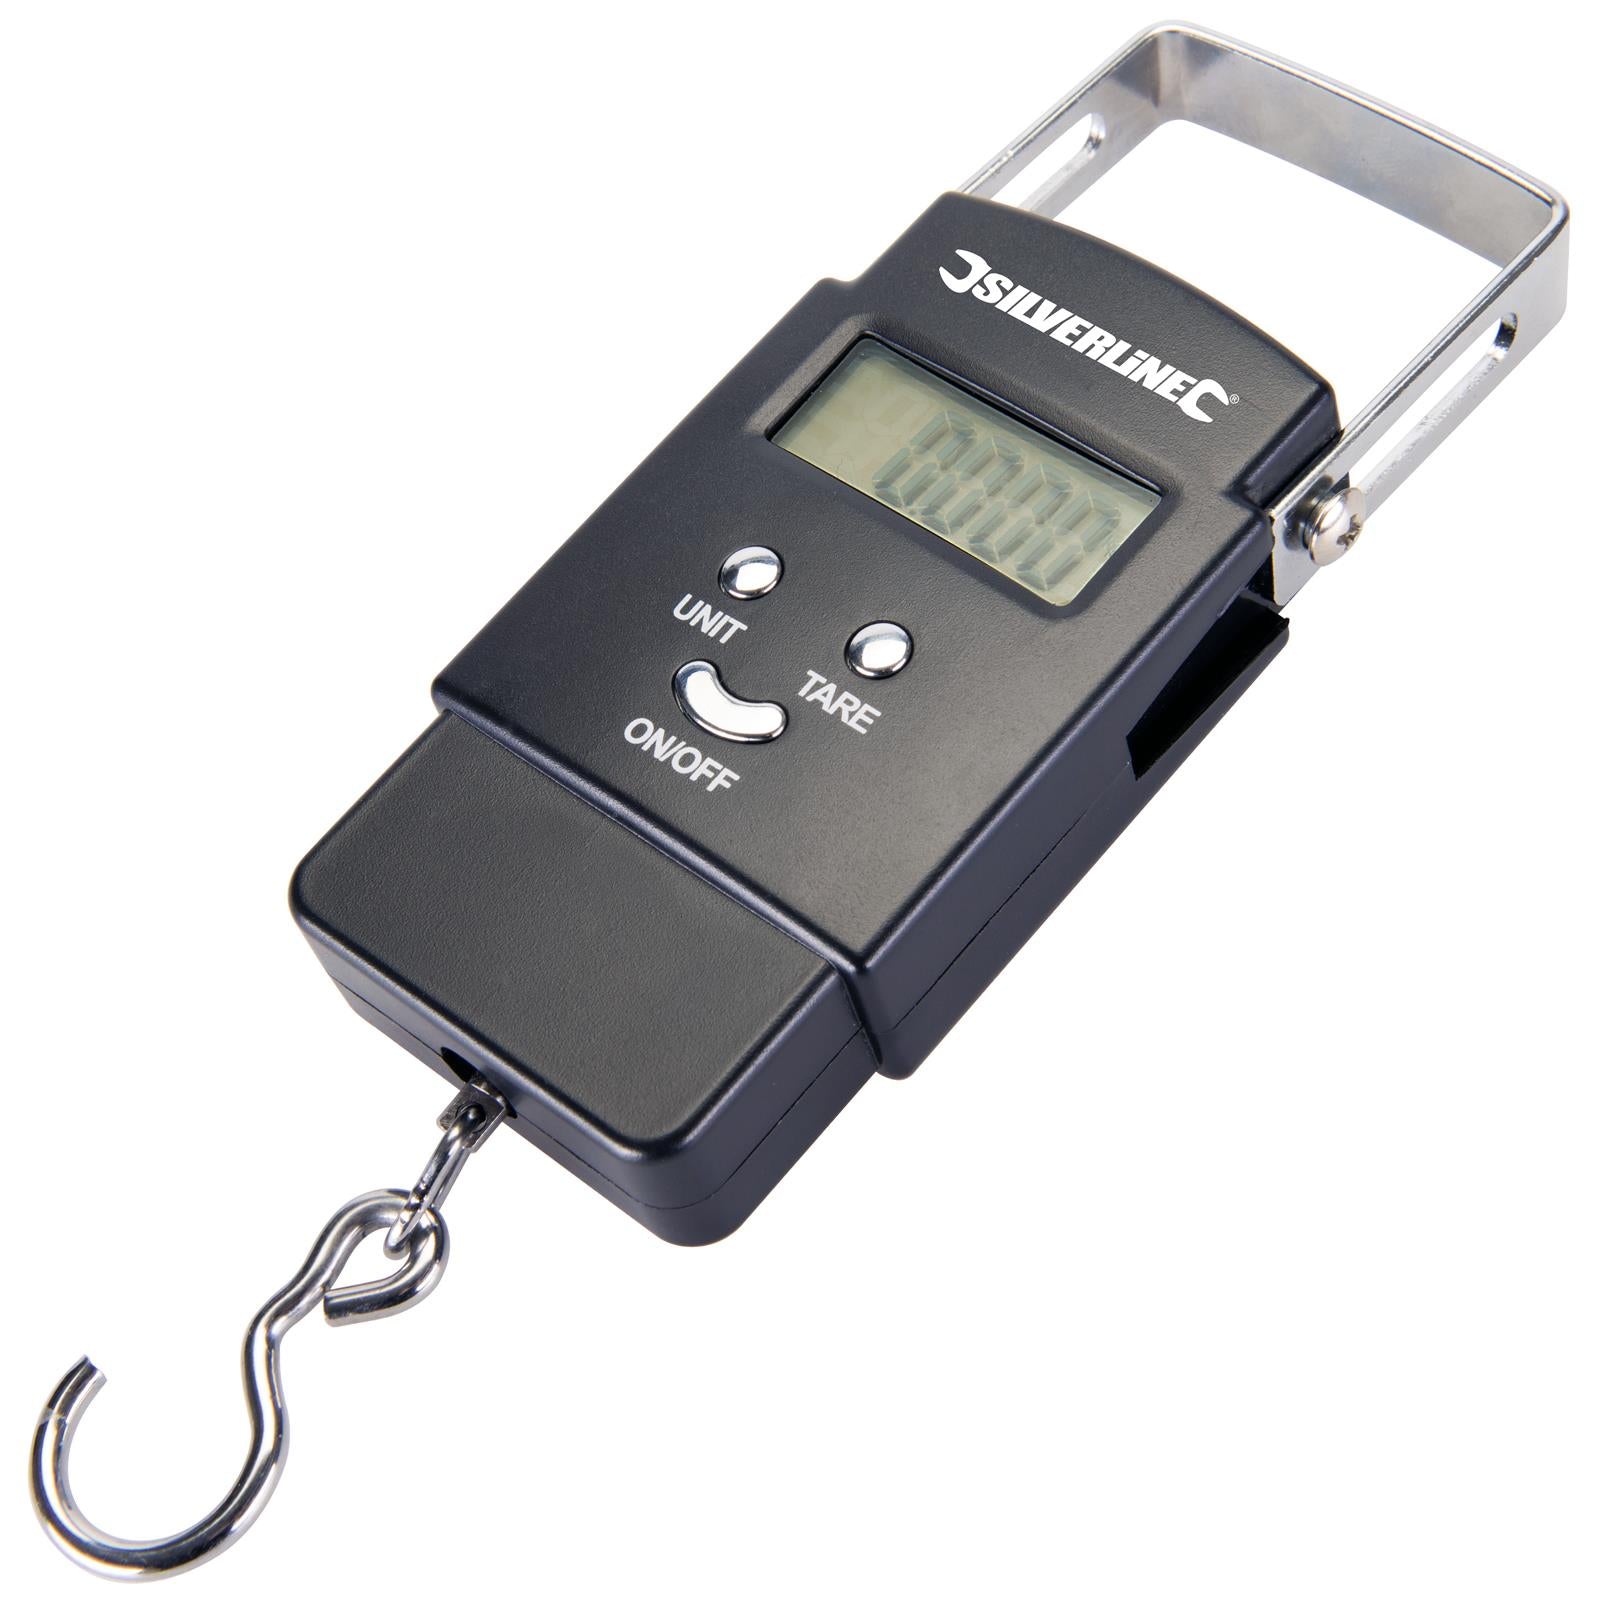 Silverline 50kg Electronic Pocket Balance Weighing Scales Metric Imperial